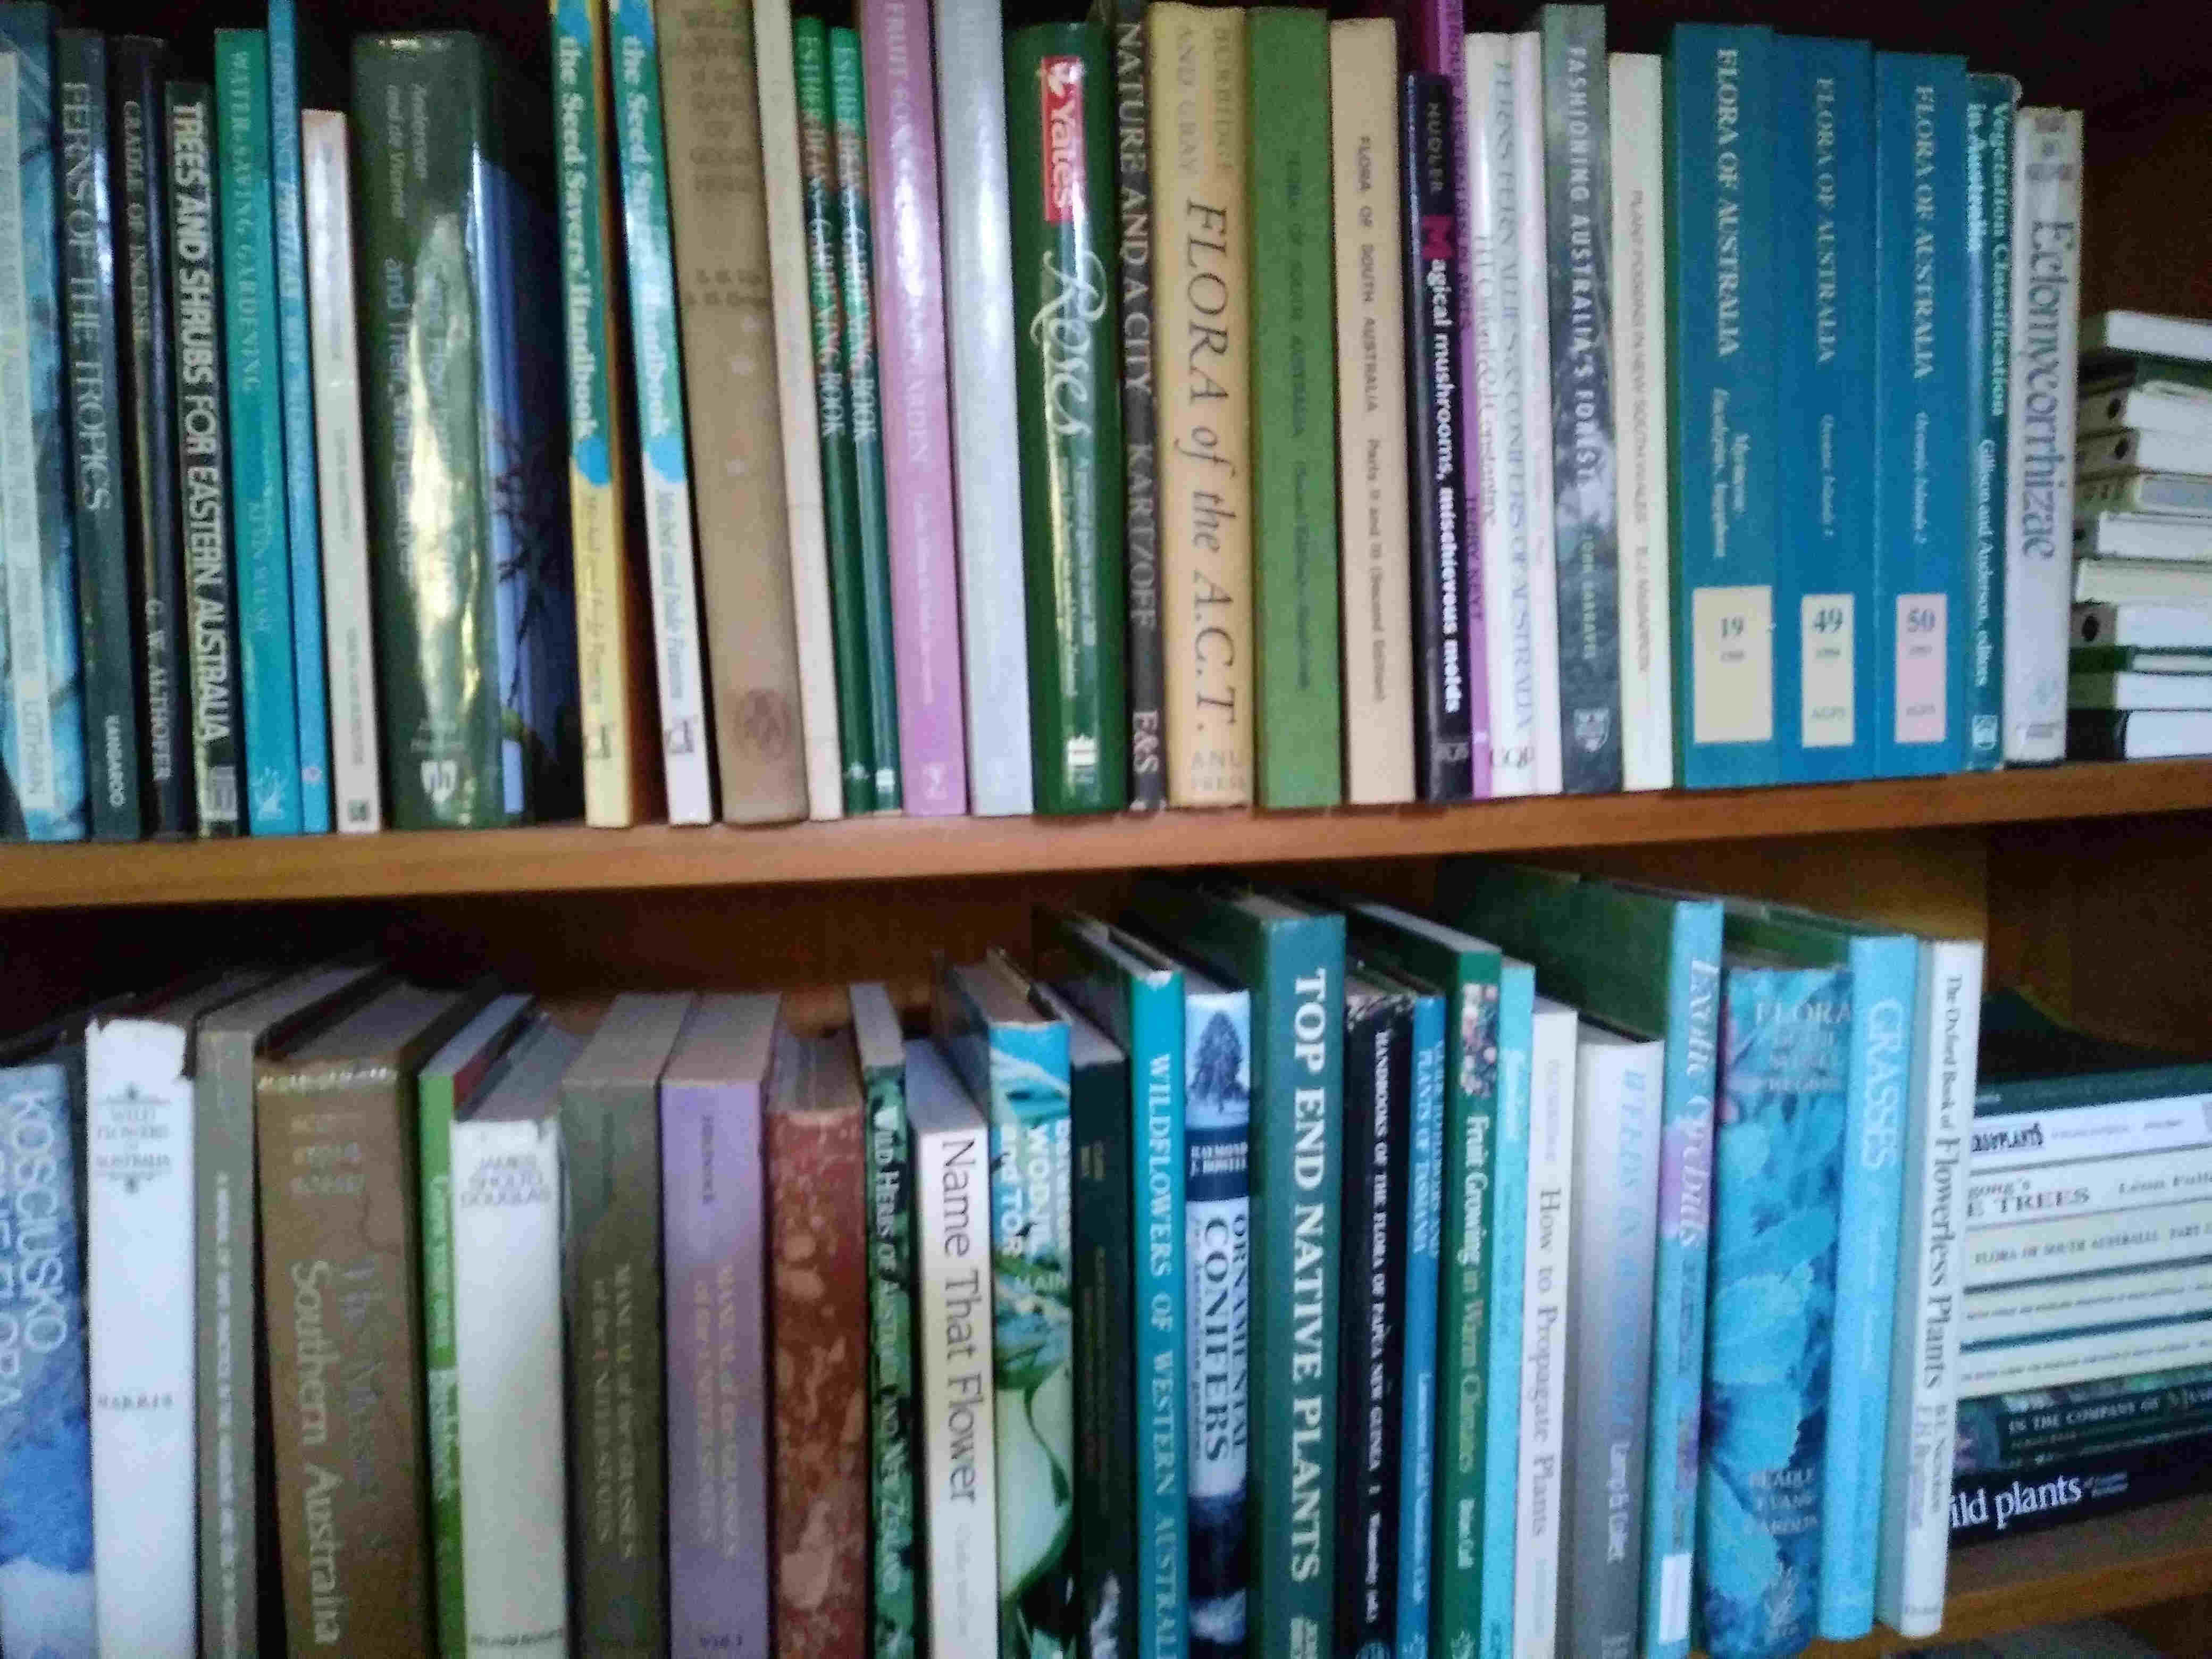 Used non-fiction books for sale in Australian second hand bookshop